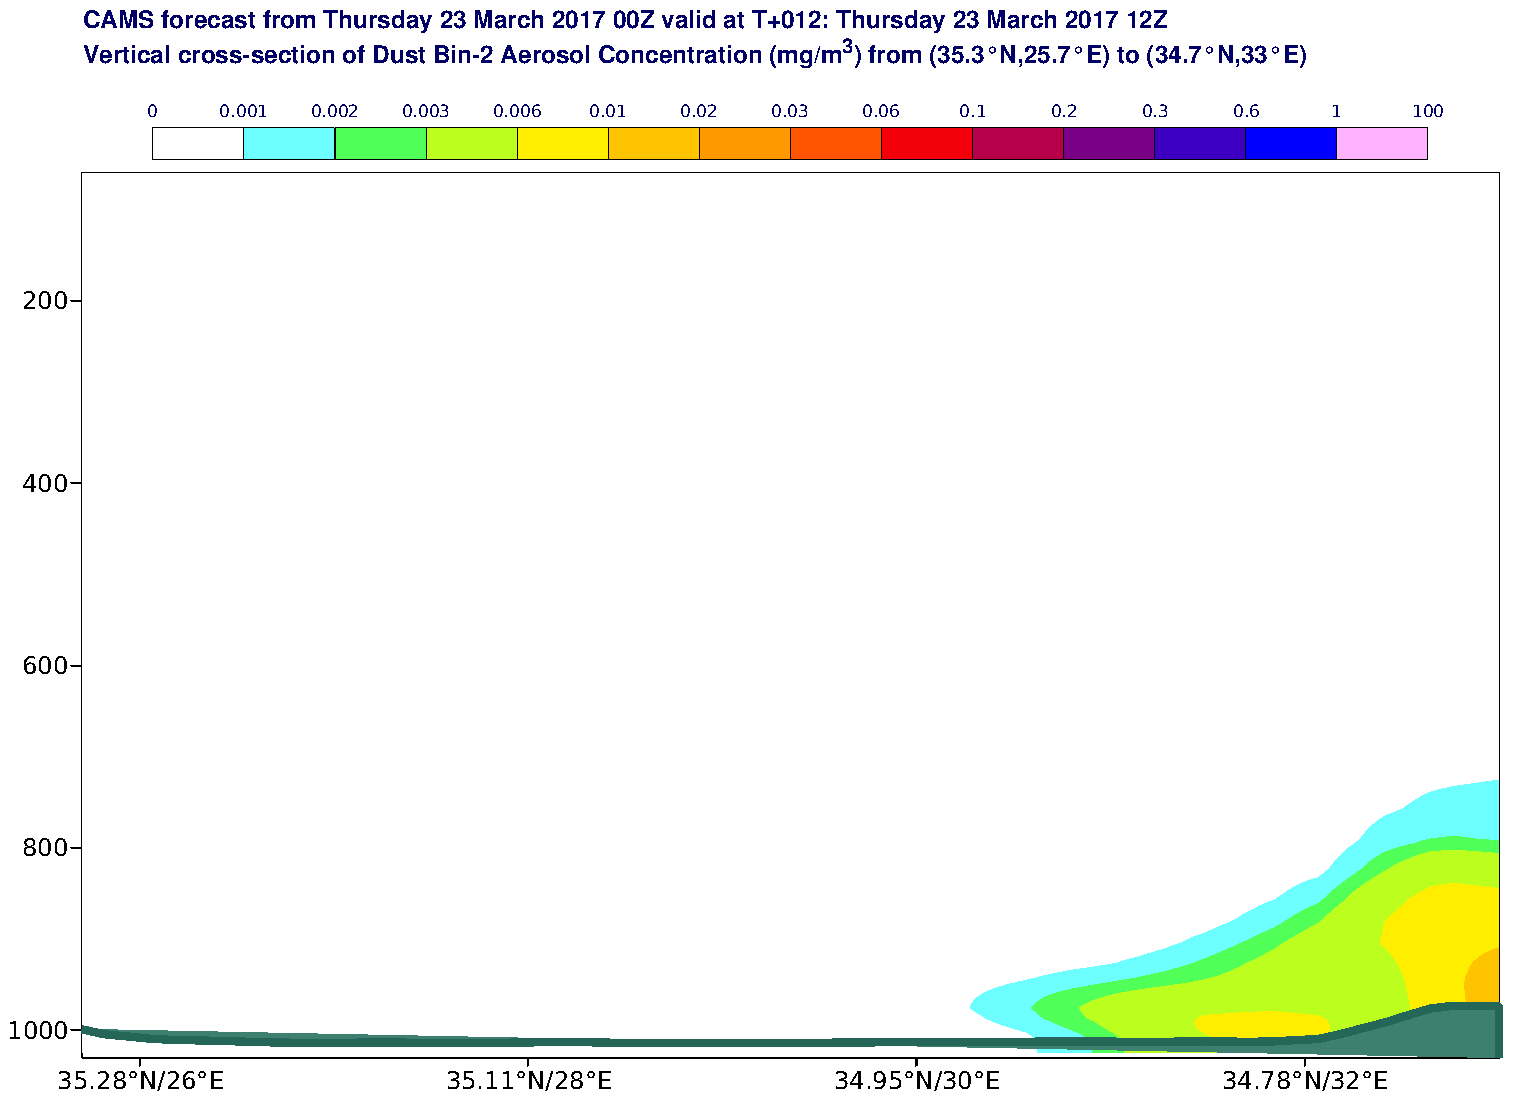 Vertical cross-section of Dust Bin-2 Aerosol Concentration (mg/m3) valid at T12 - 2017-03-23 12:00